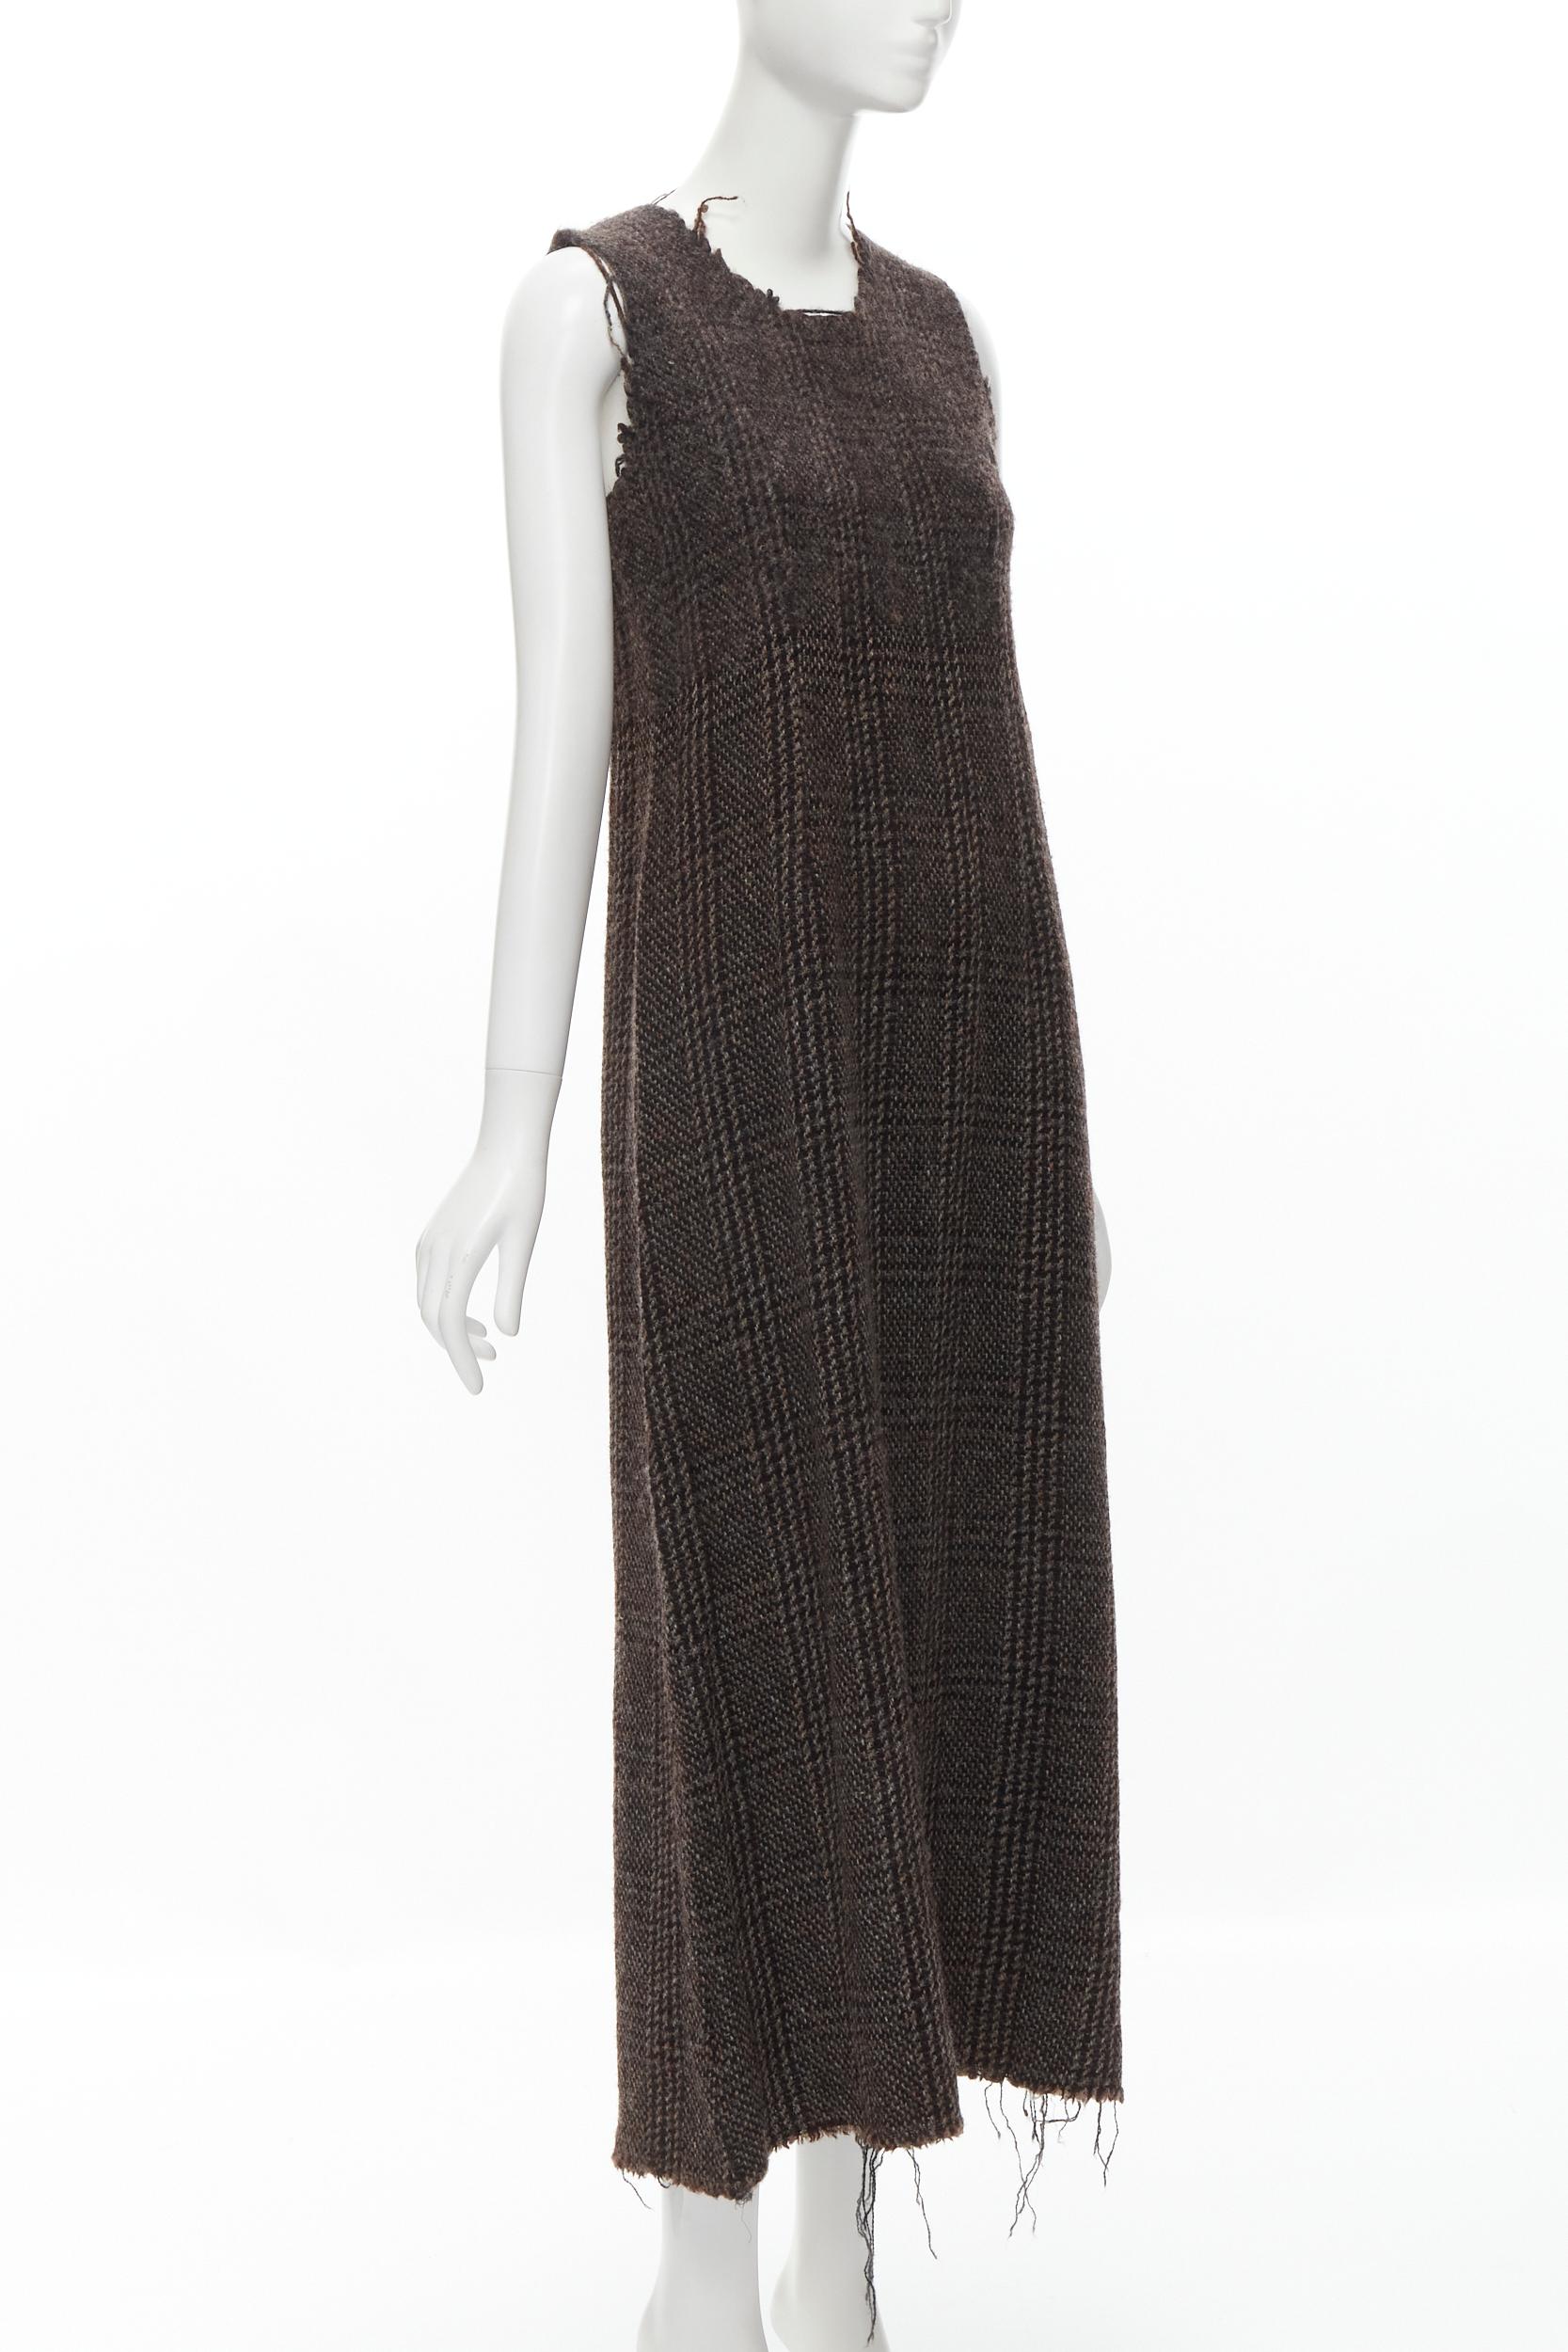 Black COMME DES GARCONS Vintage 1994 check boiled wool tweed raw frayed midi dress M For Sale